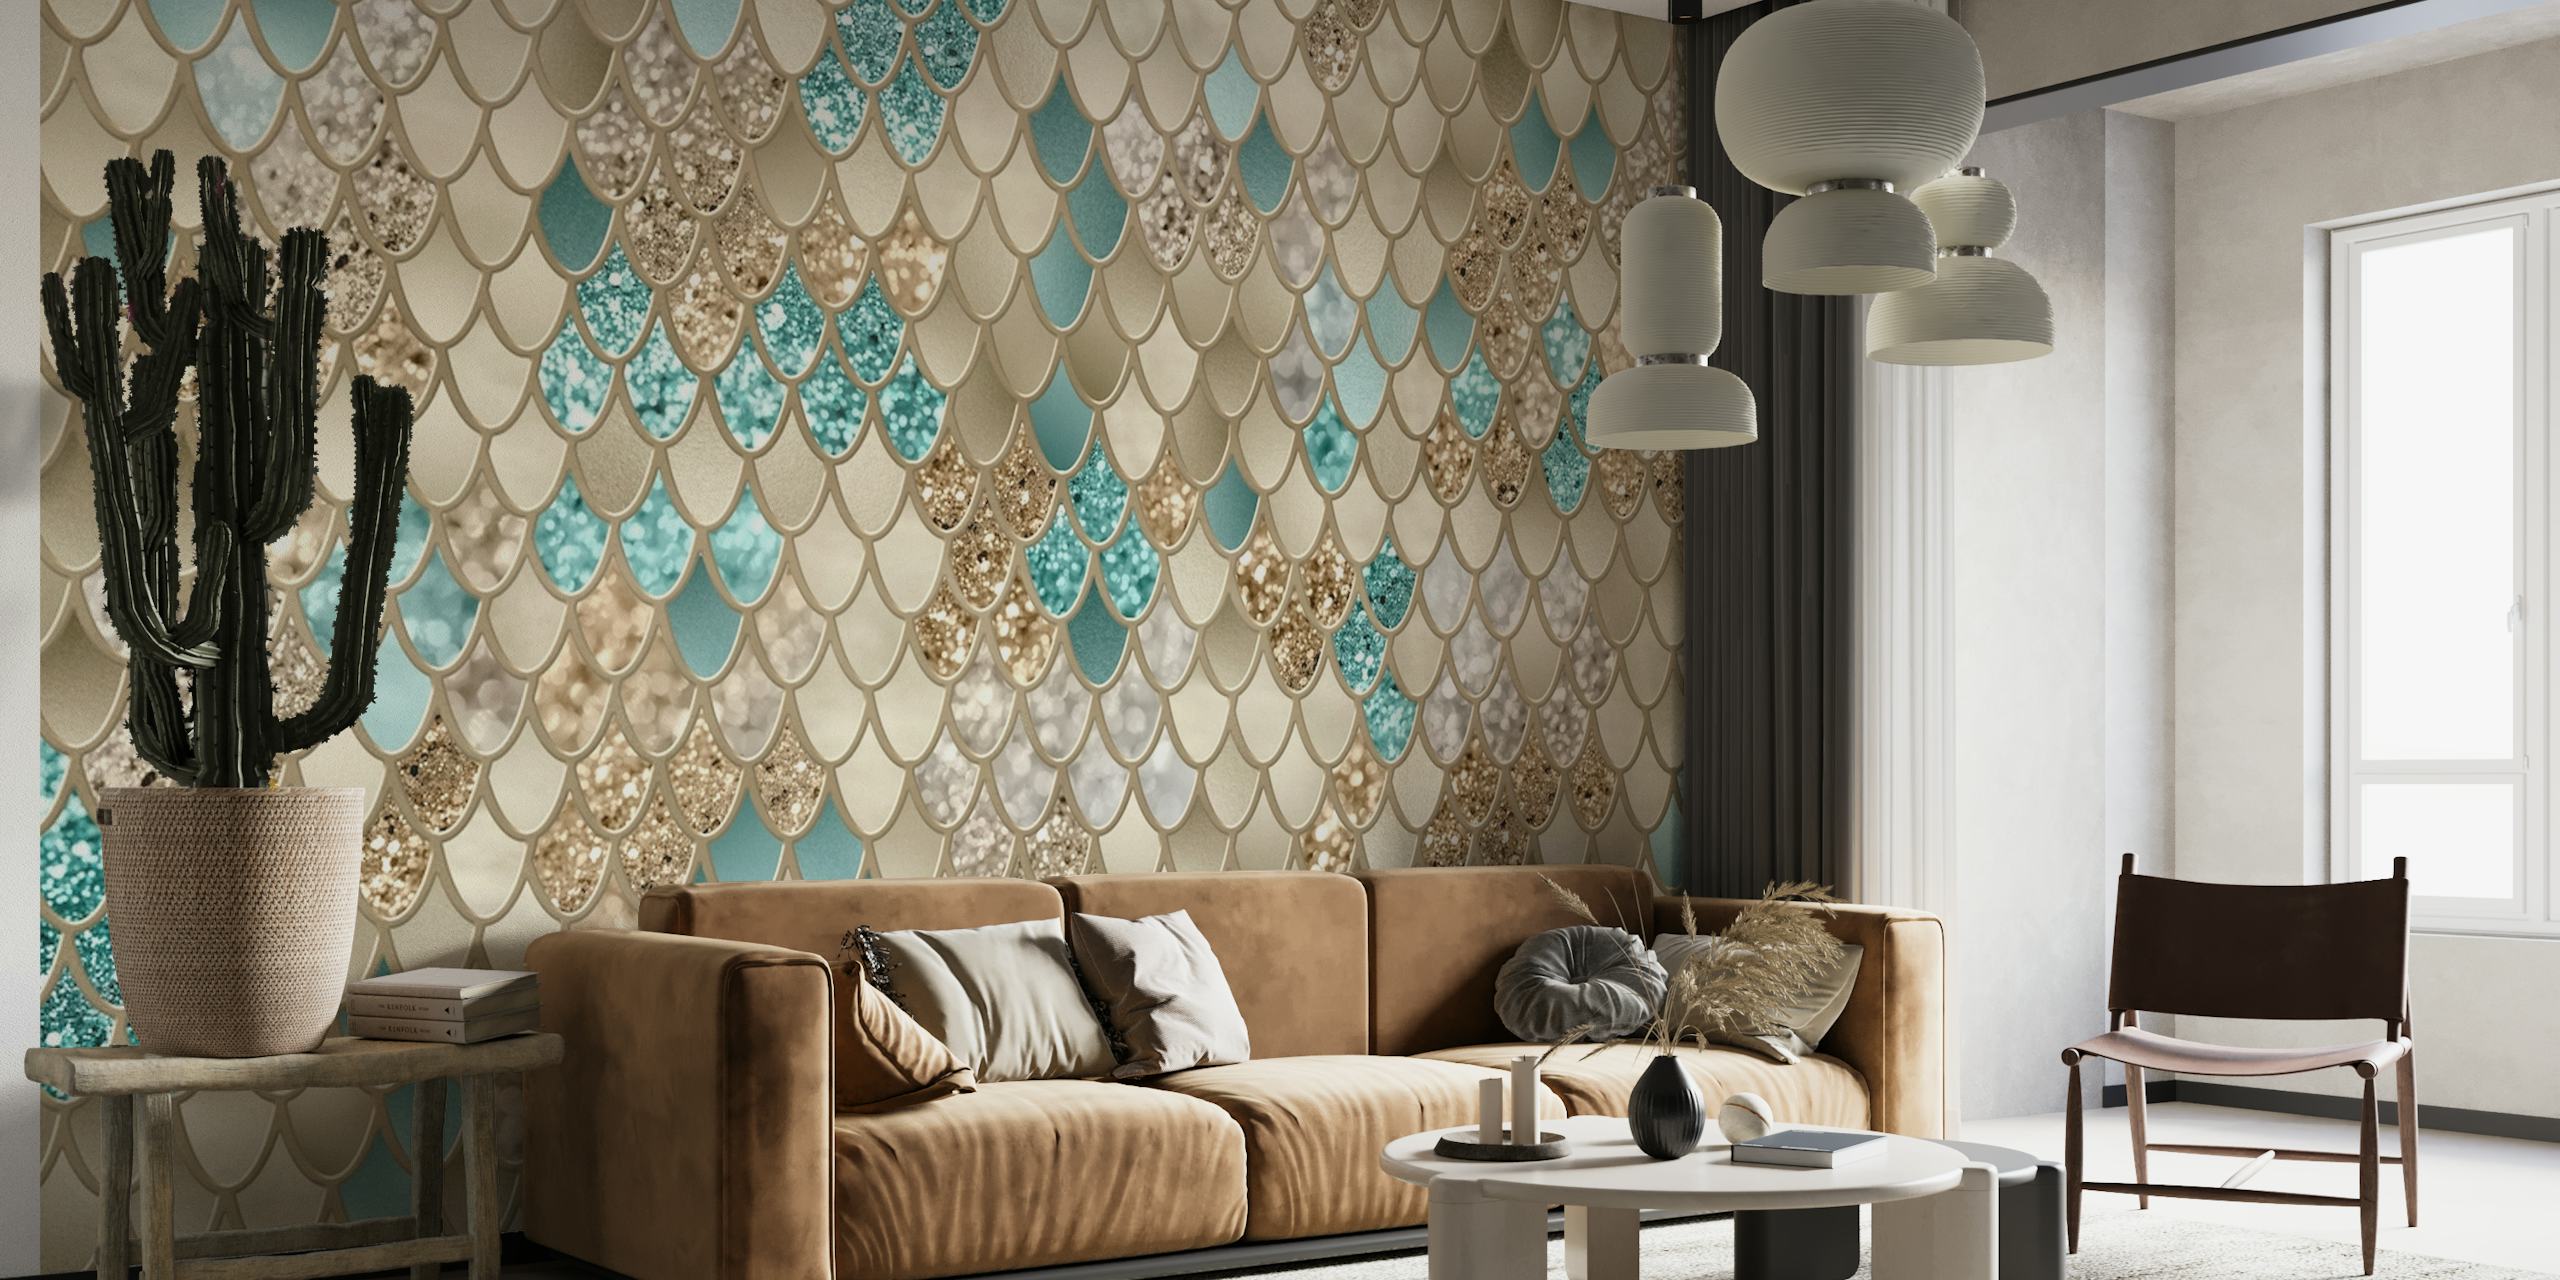 Aquatic-inspired mermaid scale pattern wall mural with shades of aqua, blue, and gold